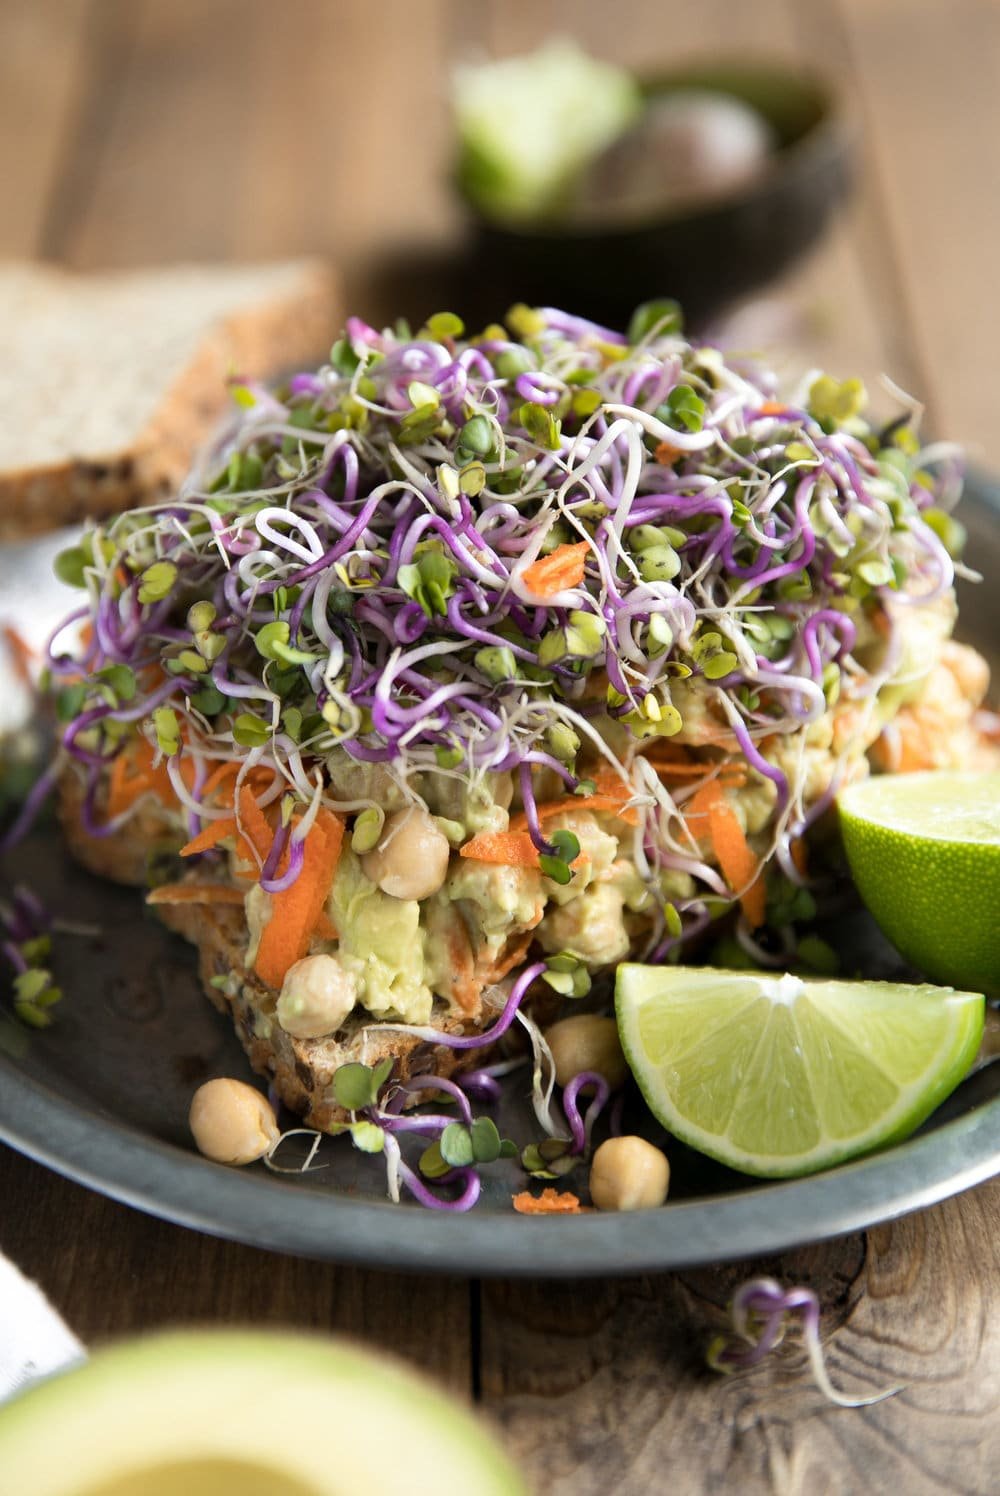 10 Easy Dinners for Busy Nights - Smashed Avocado and Chickpea Sandwich